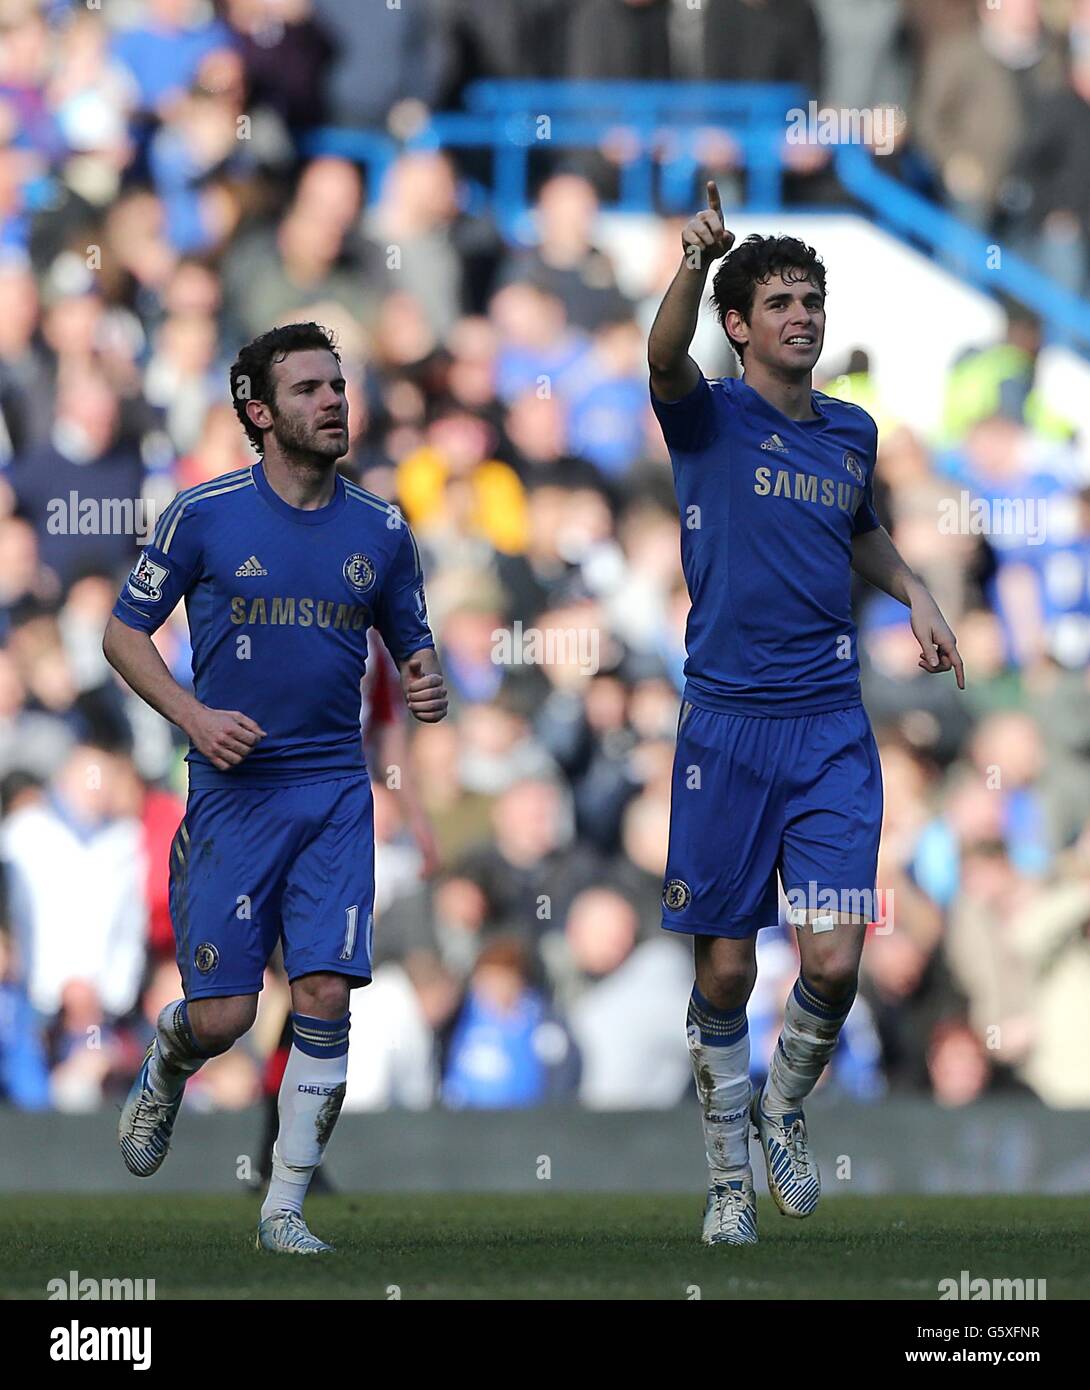 Chelsea's Emboaba Oscar (right) celebrates scoring his side's second goal of the game with teammate Juan Mata (left) Stock Photo